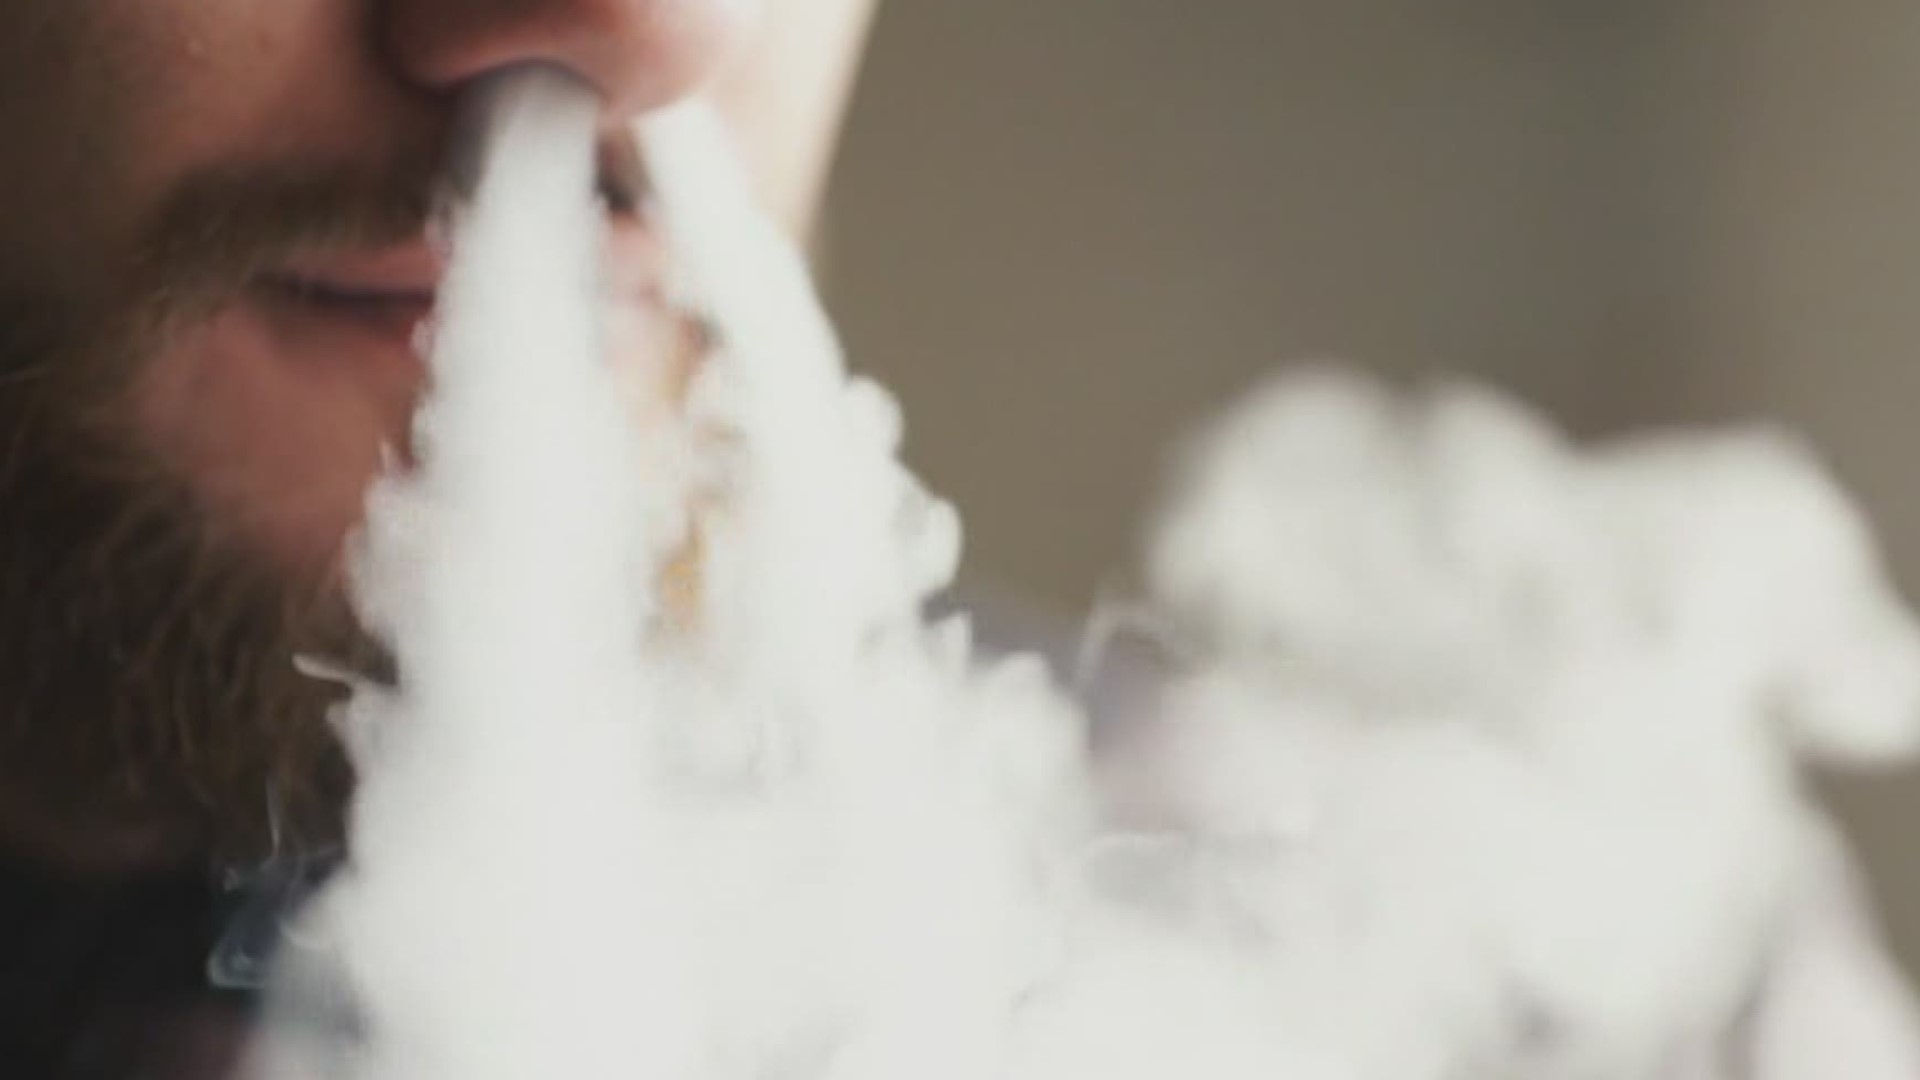 A story we aired Tuesday night sparked a huge conversation on Facebook about vaping and e-cigarettes.